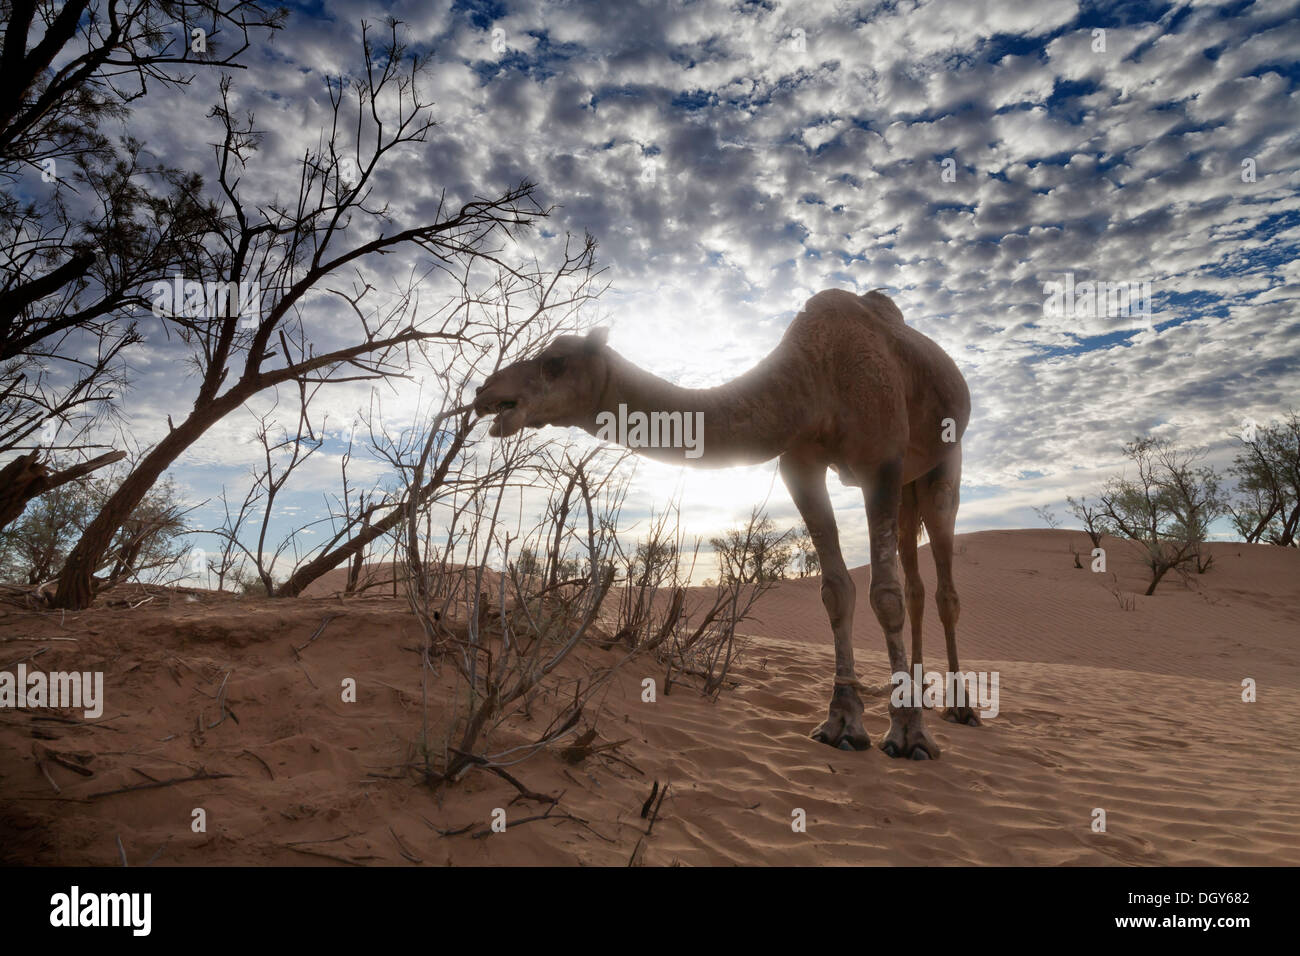 Dromedary camel partly silhouetted eating from a tamarisk tree in the desert with a mottled dawn sky behind Stock Photo